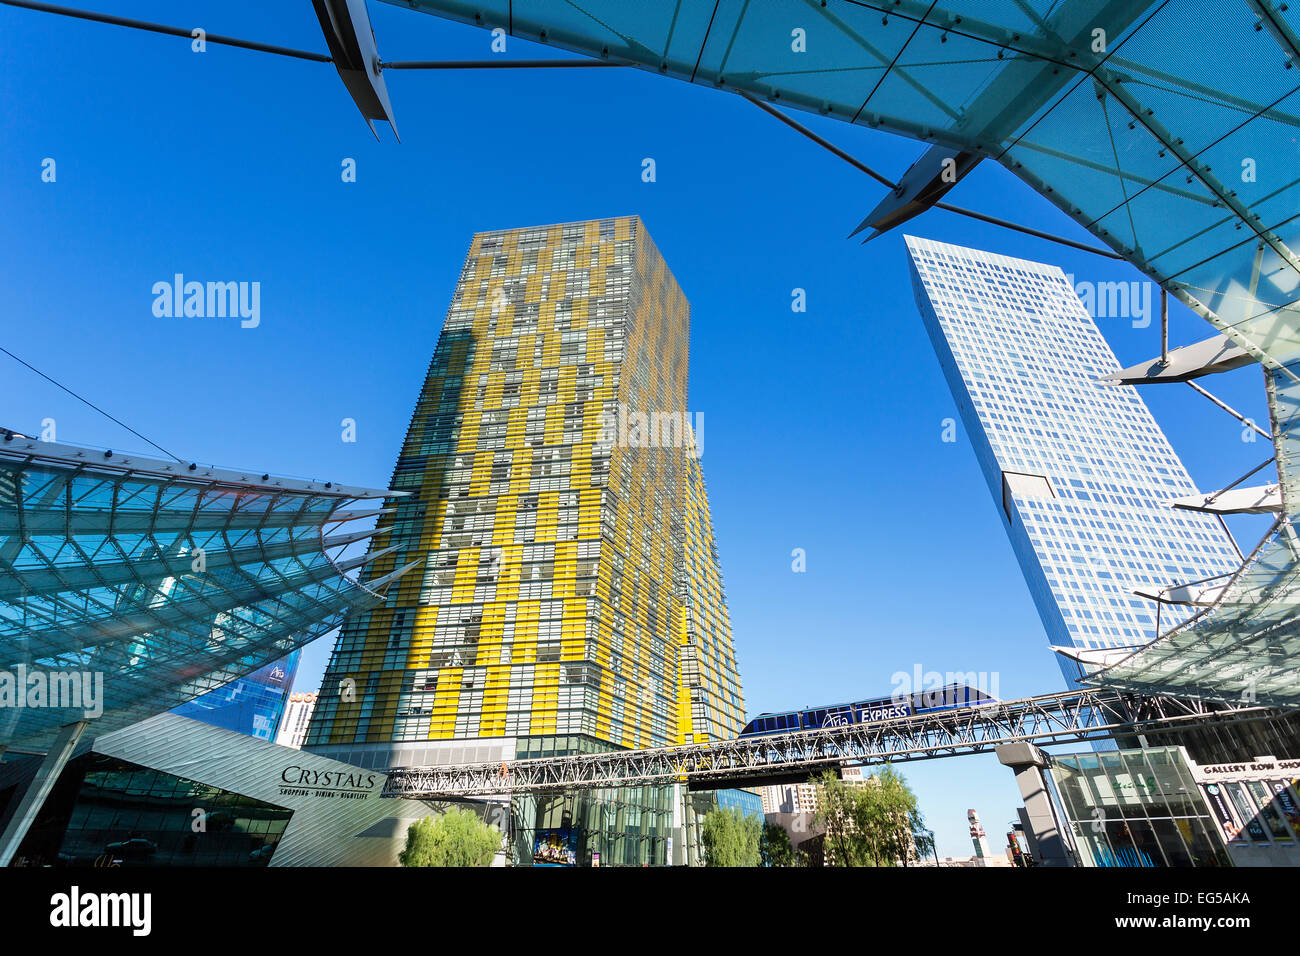 Las Vegas, The Crystals shopping mall at CityCenter complex Stock Photo